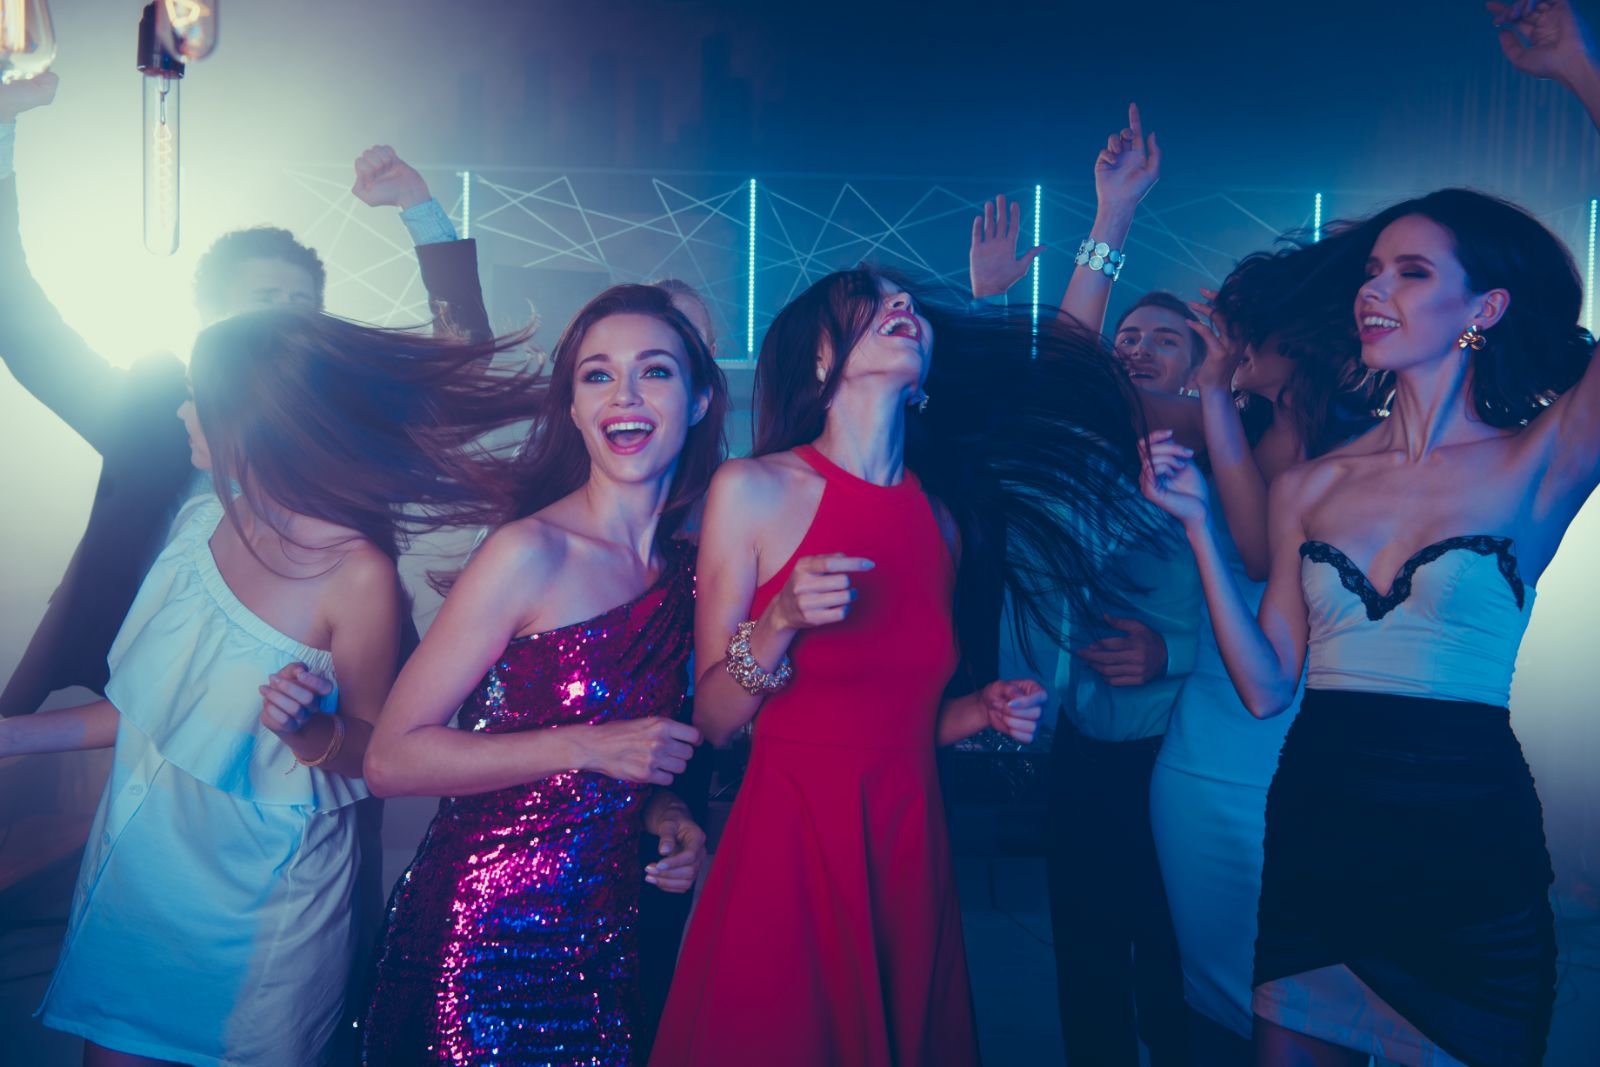 Where to Find the Best NYC Night Clubs